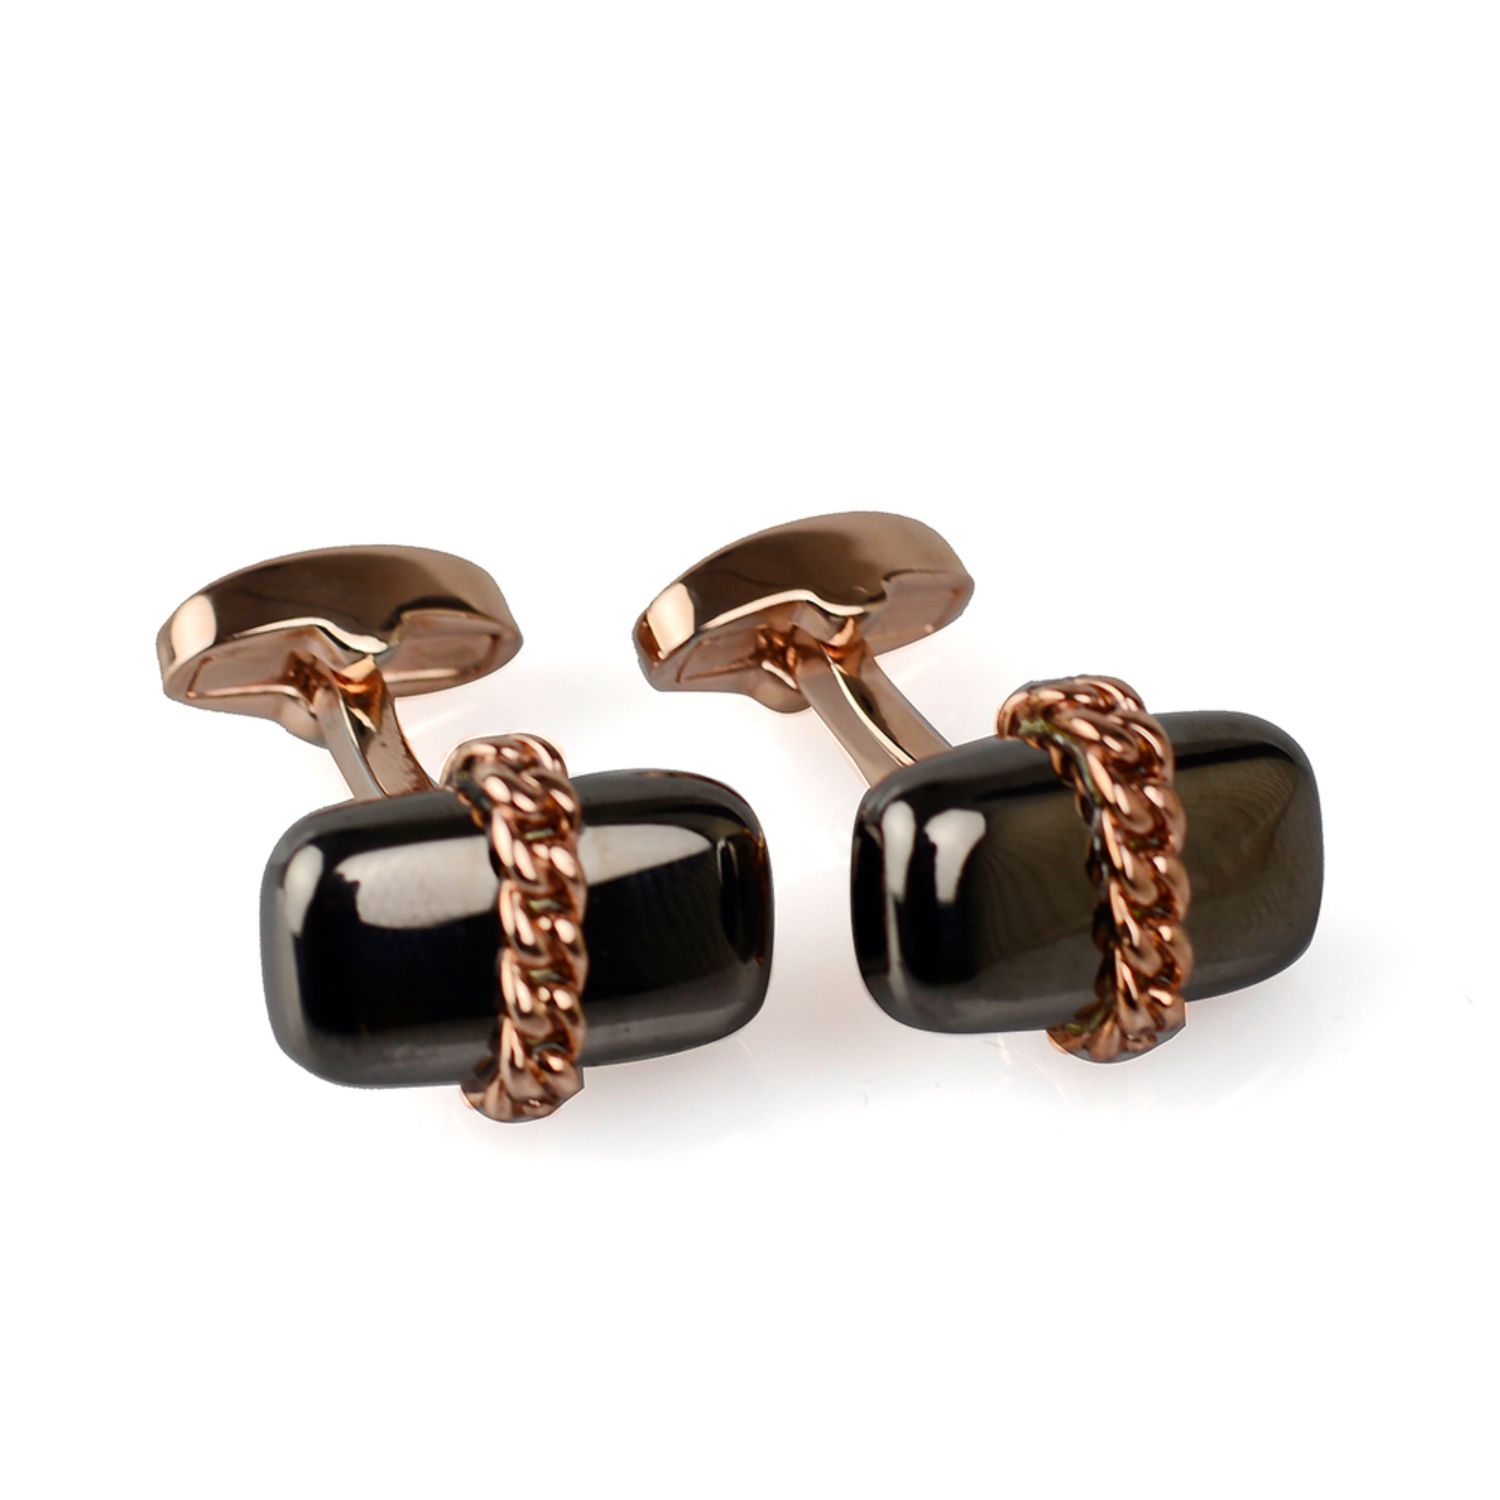 David Wej Men's Chained Capsule Cufflinks – Rose Gold